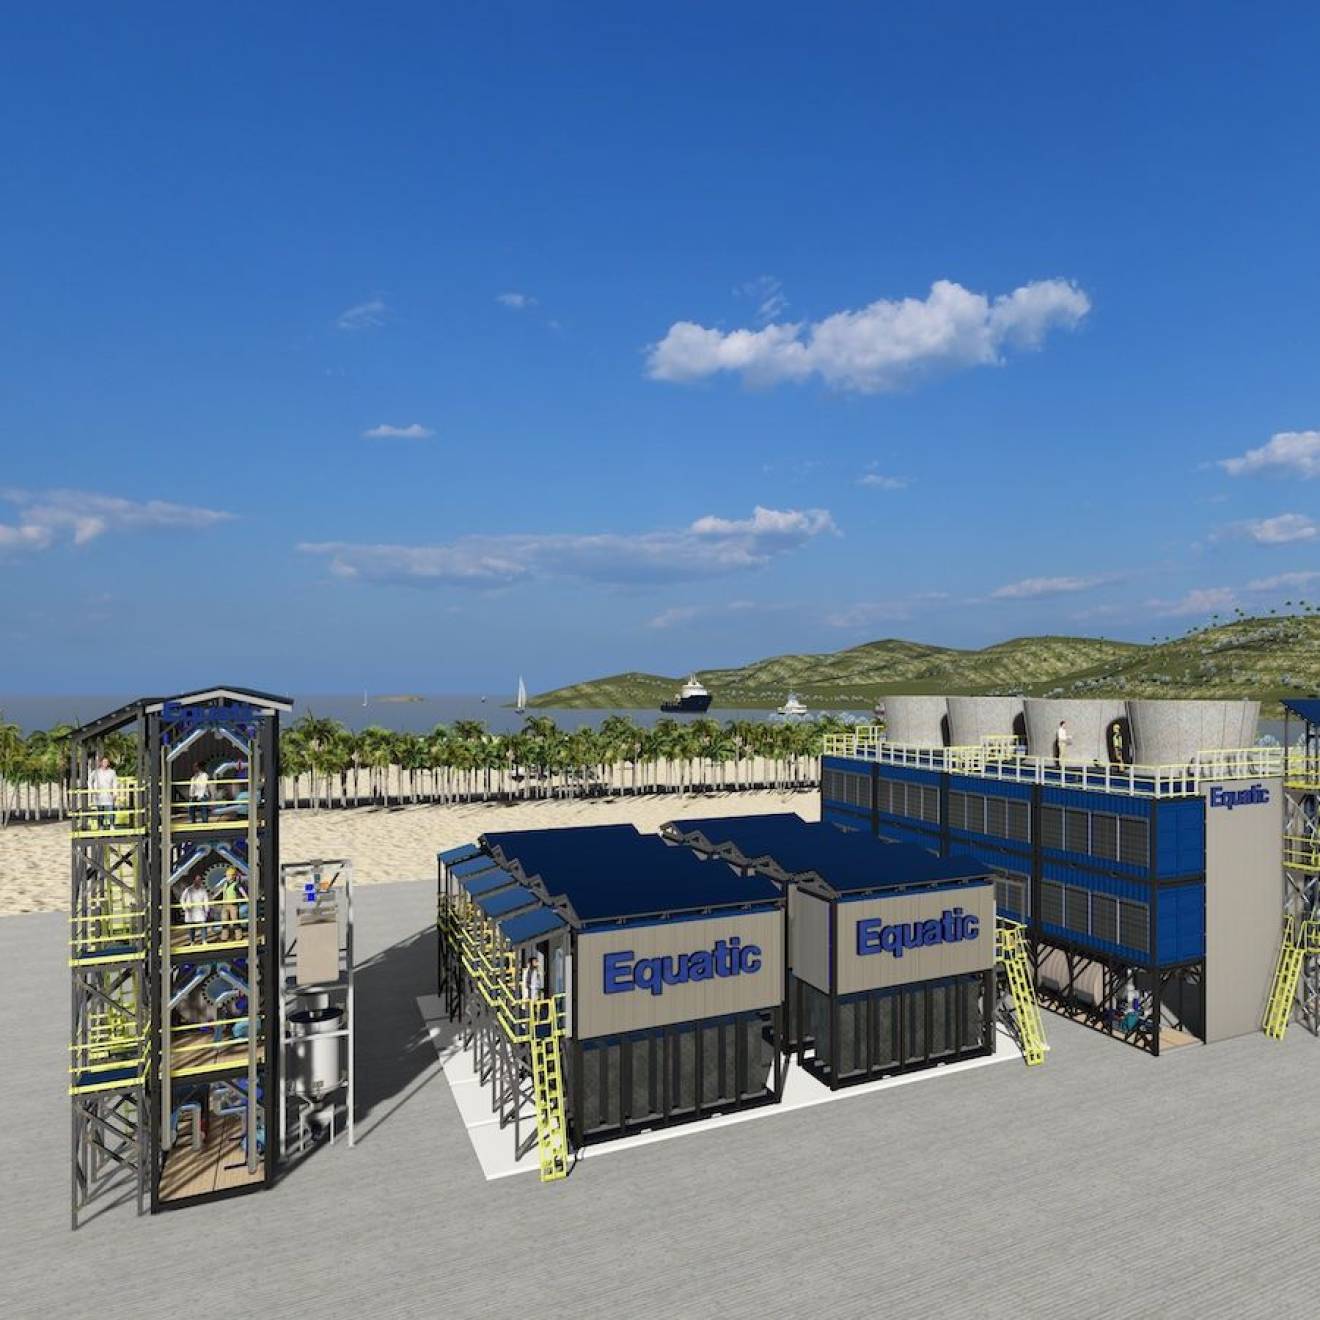 A rendering of a carbon removal plant in front of a beach and ocean